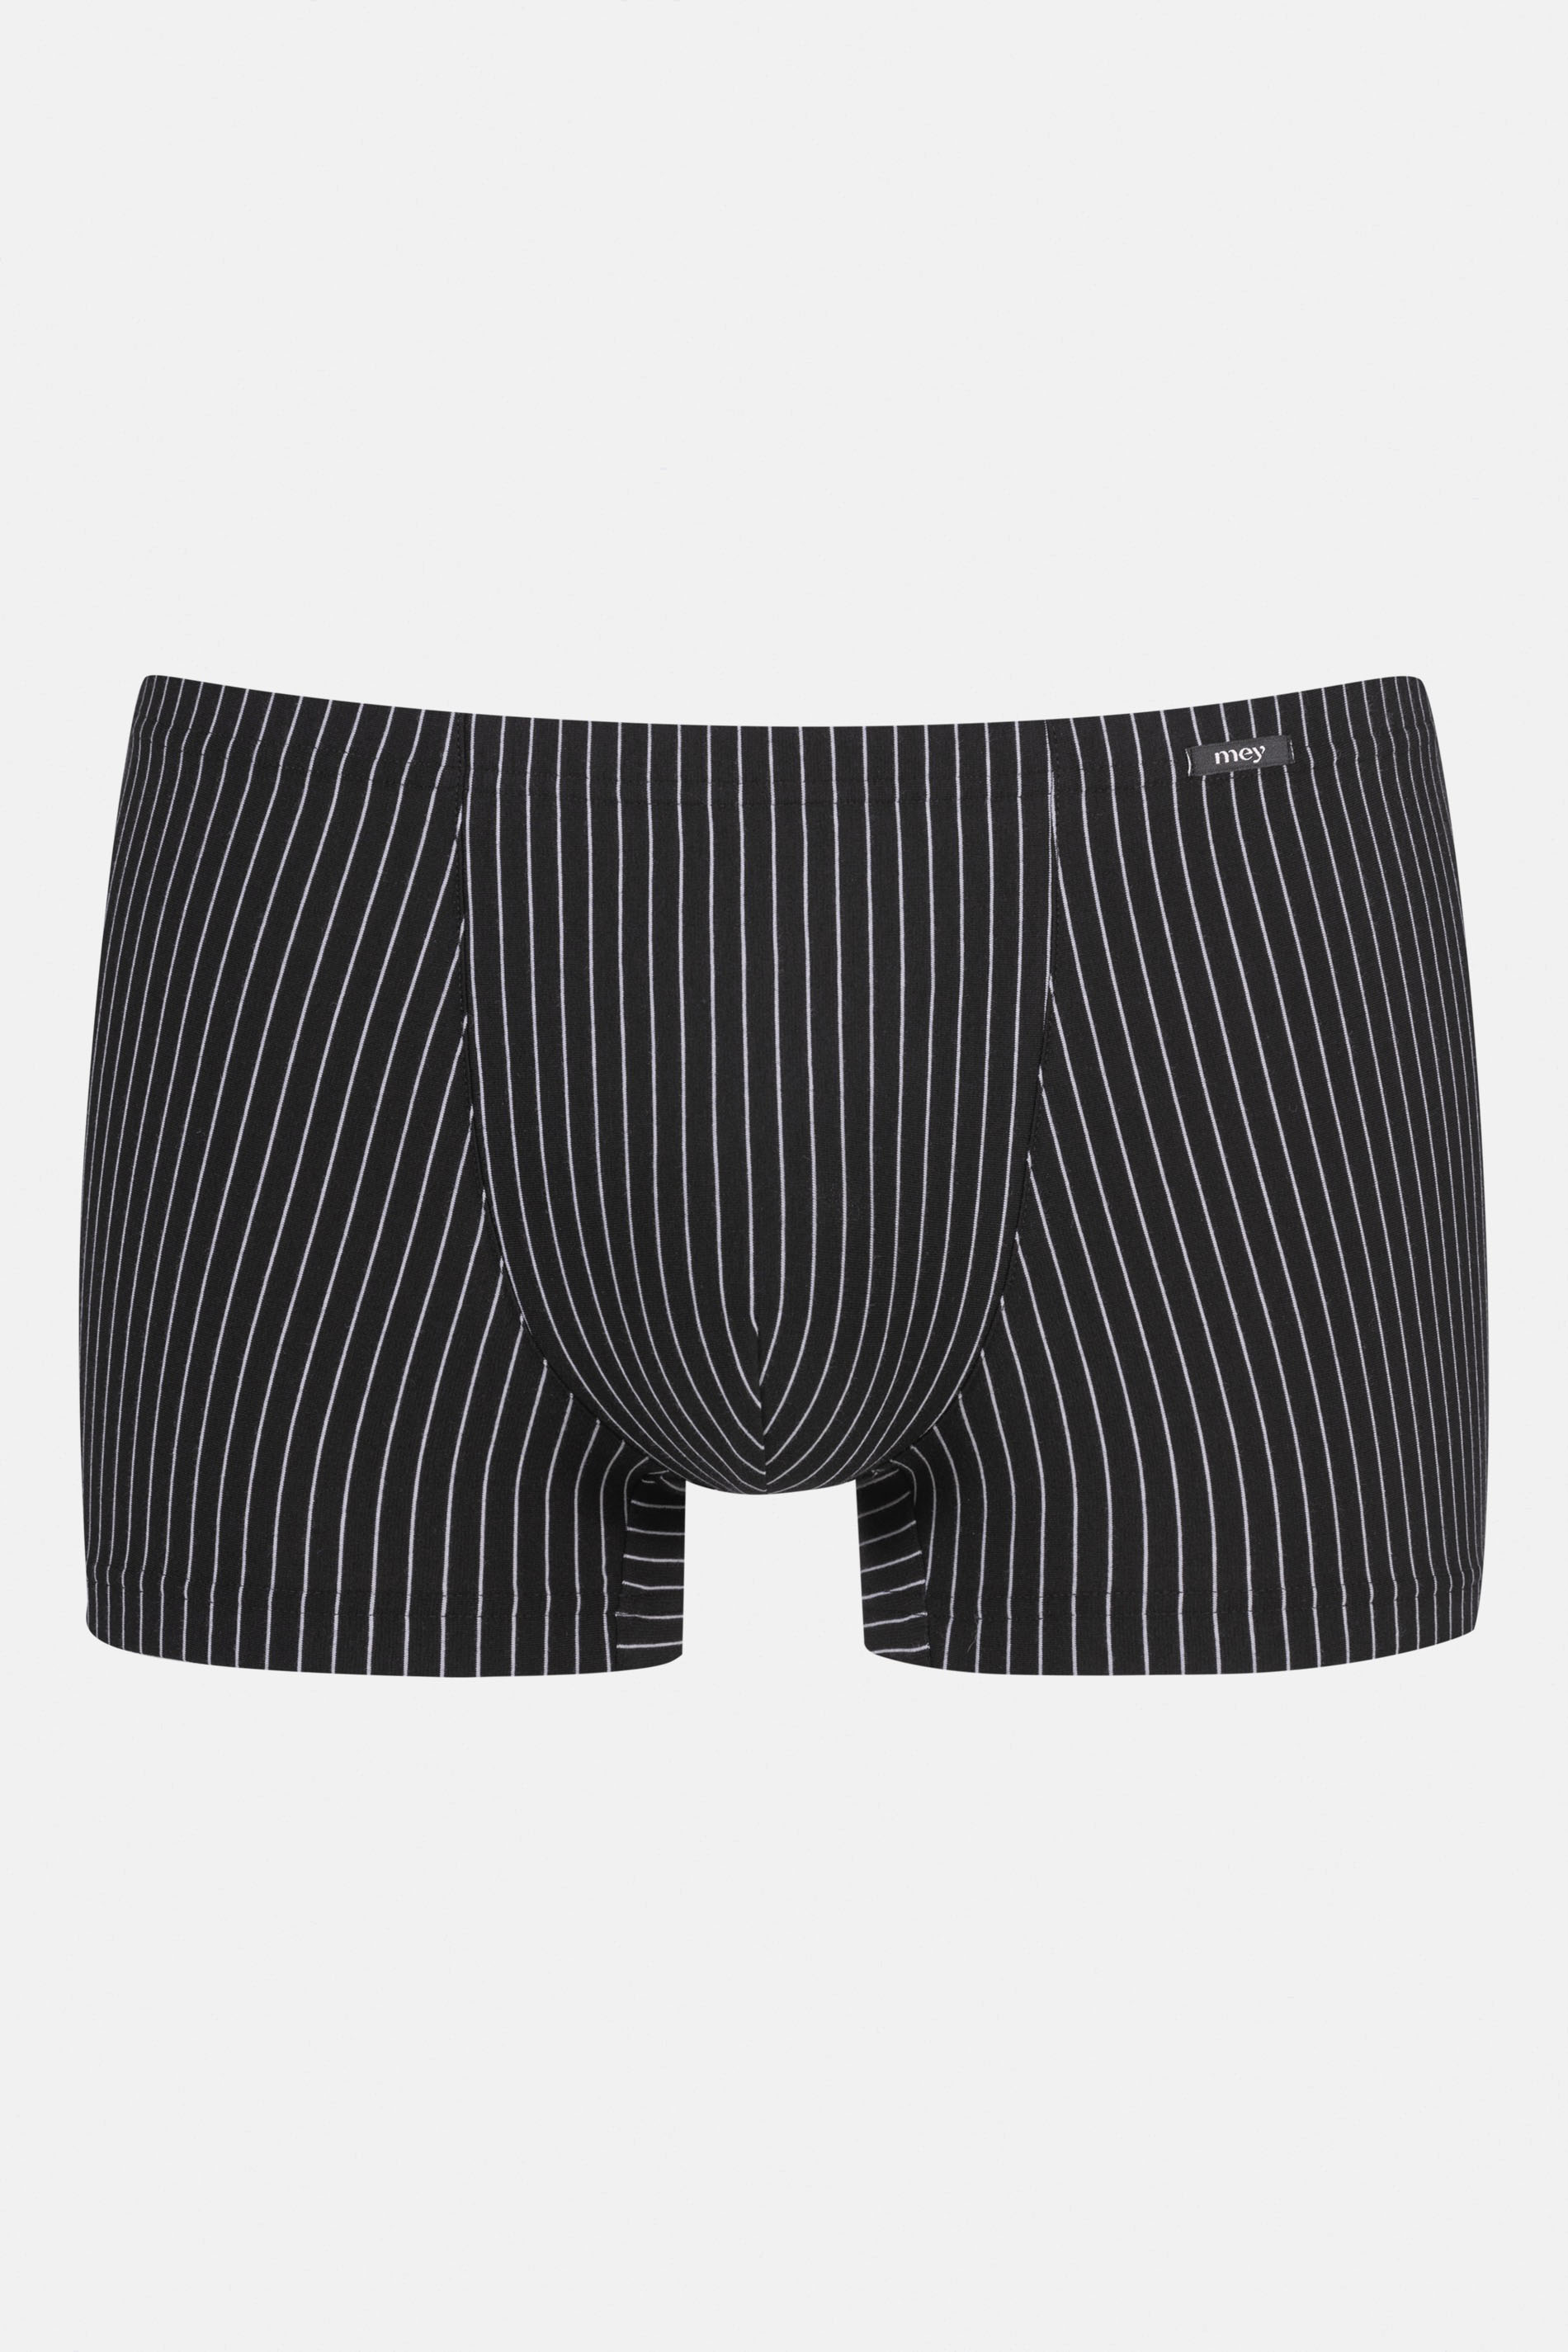 Shorty Serie BC Stripes Uitknippen | mey®